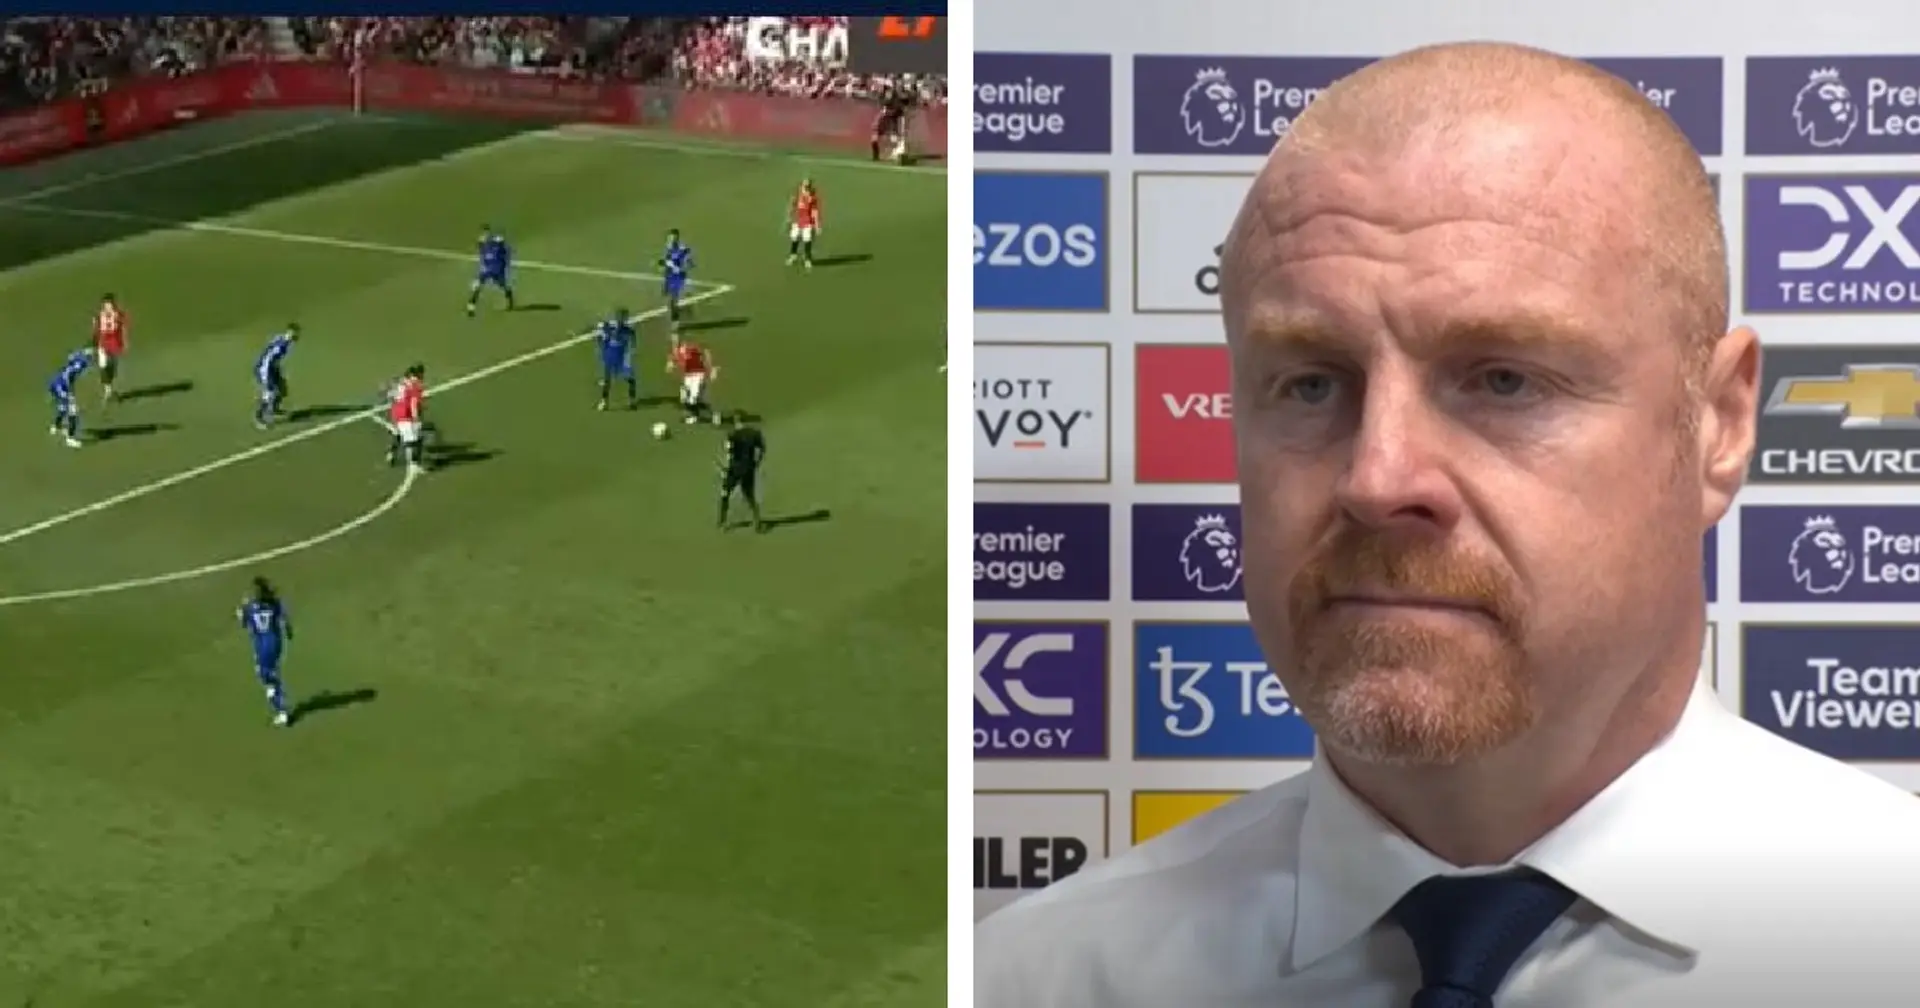 Everton coach Dyche: We made too many mistakes against a good side